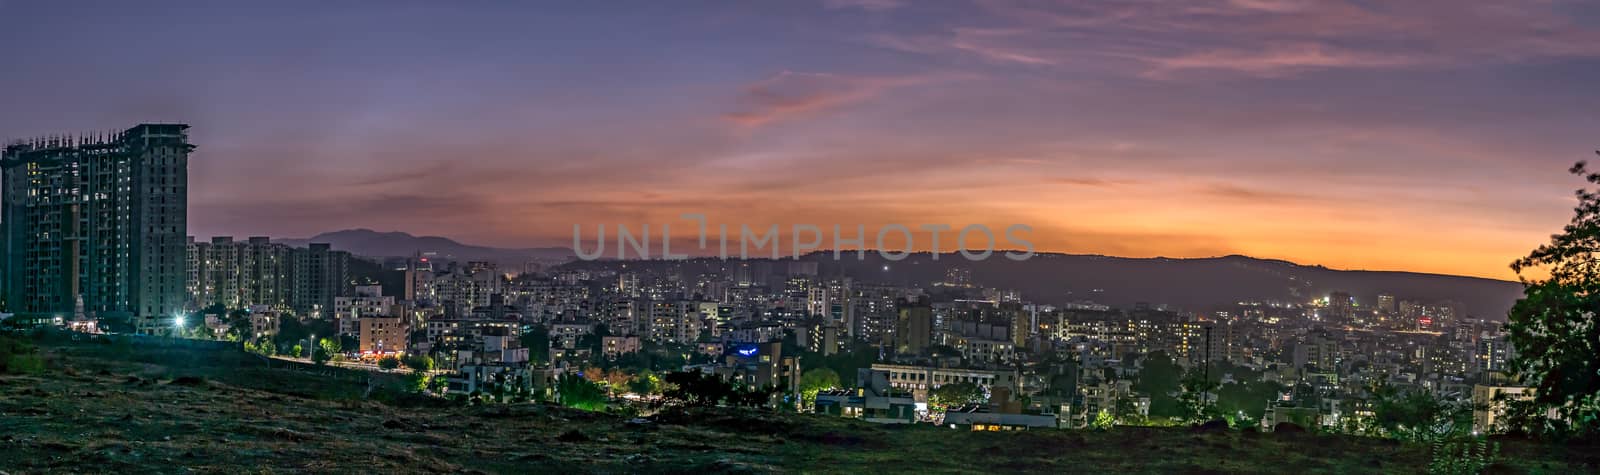 Panorama image of beautiful evening sky in the city with some lights in buildings. Can be used as background. by lalam